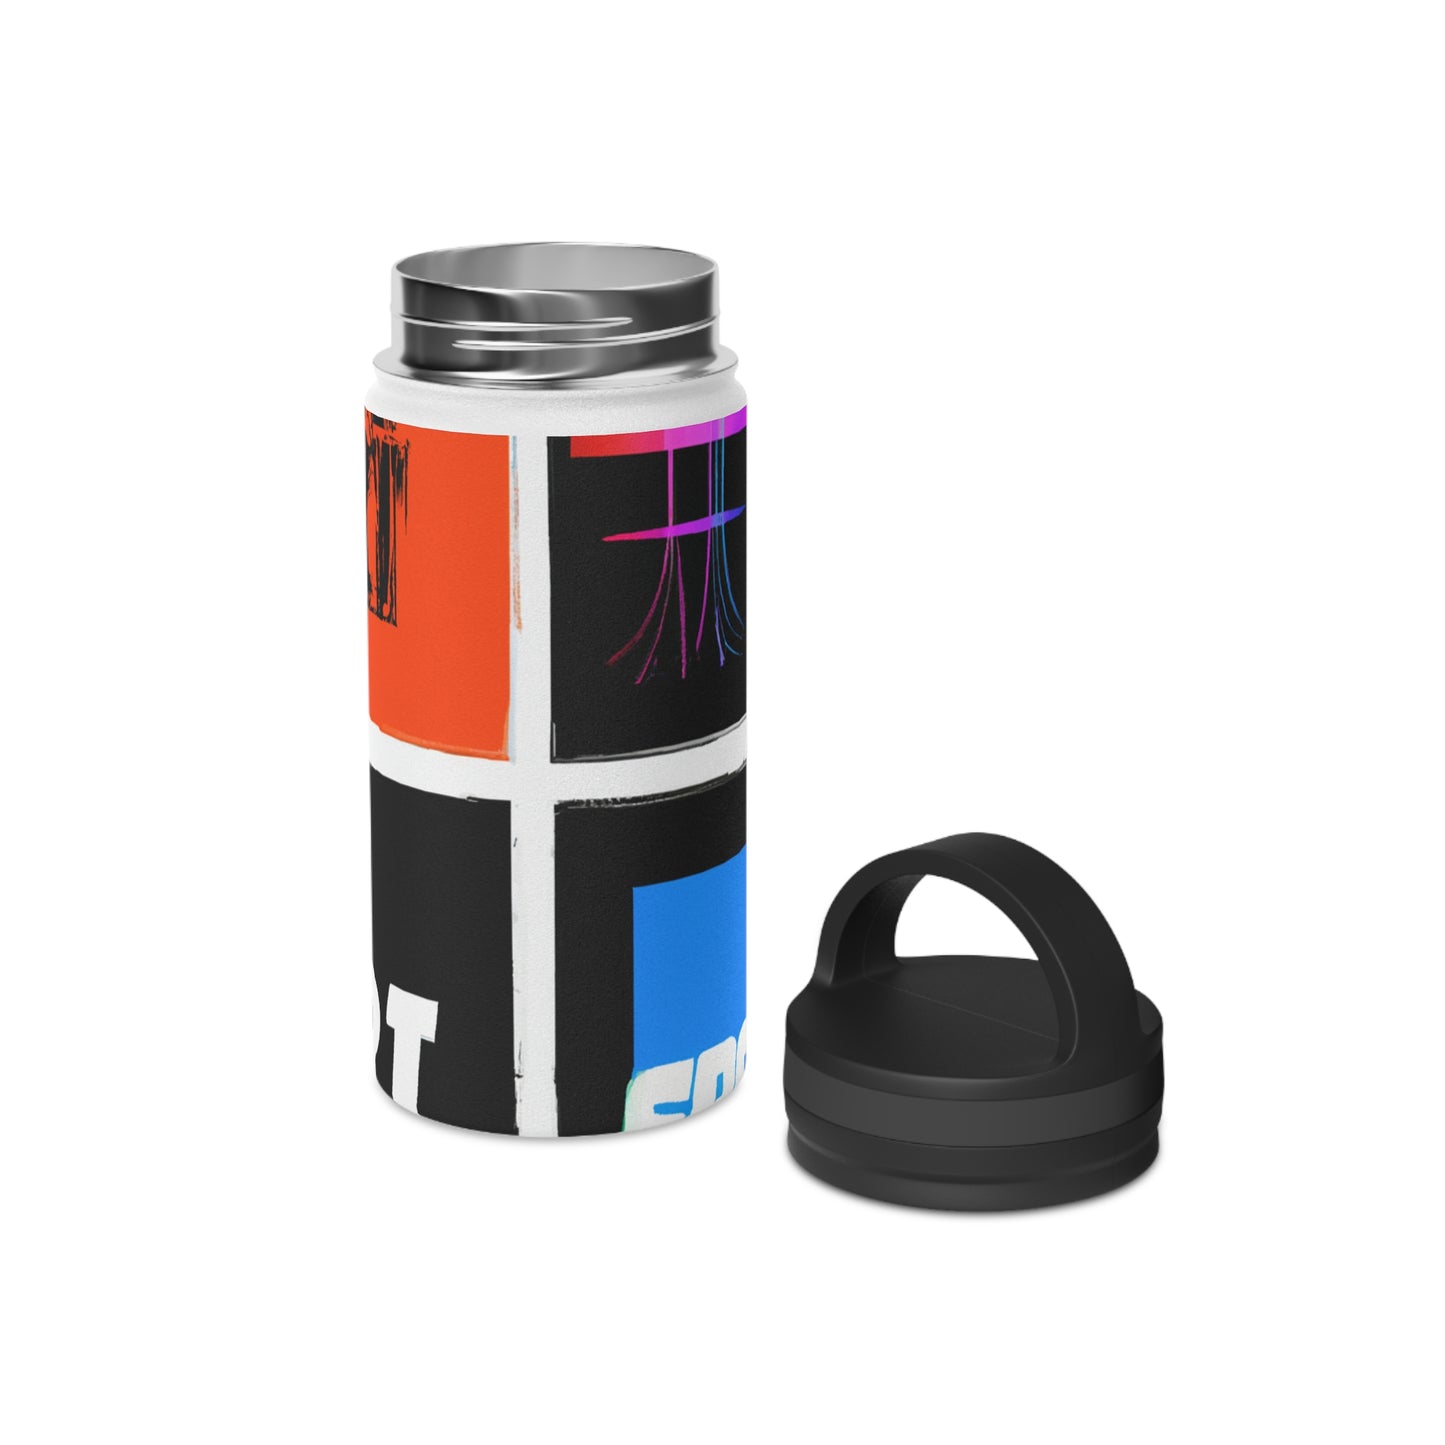 "Athletic Abstractions: Artistic Interpretations of the Sporting World" - Go Plus Stainless Steel Water Bottle, Handle Lid